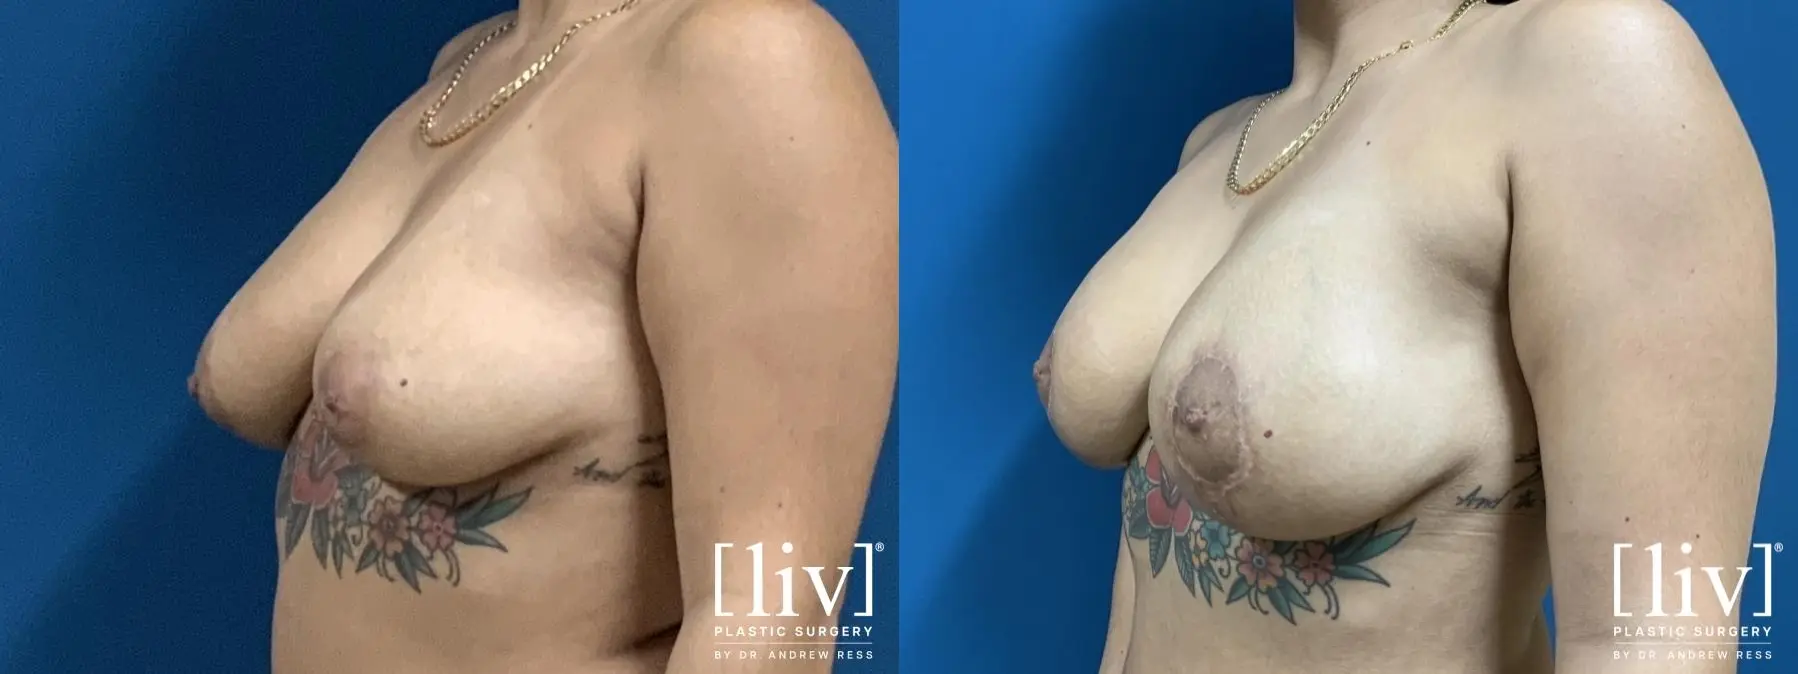 Breast Lift And Augmentation: Patient 2 - Before and After 2